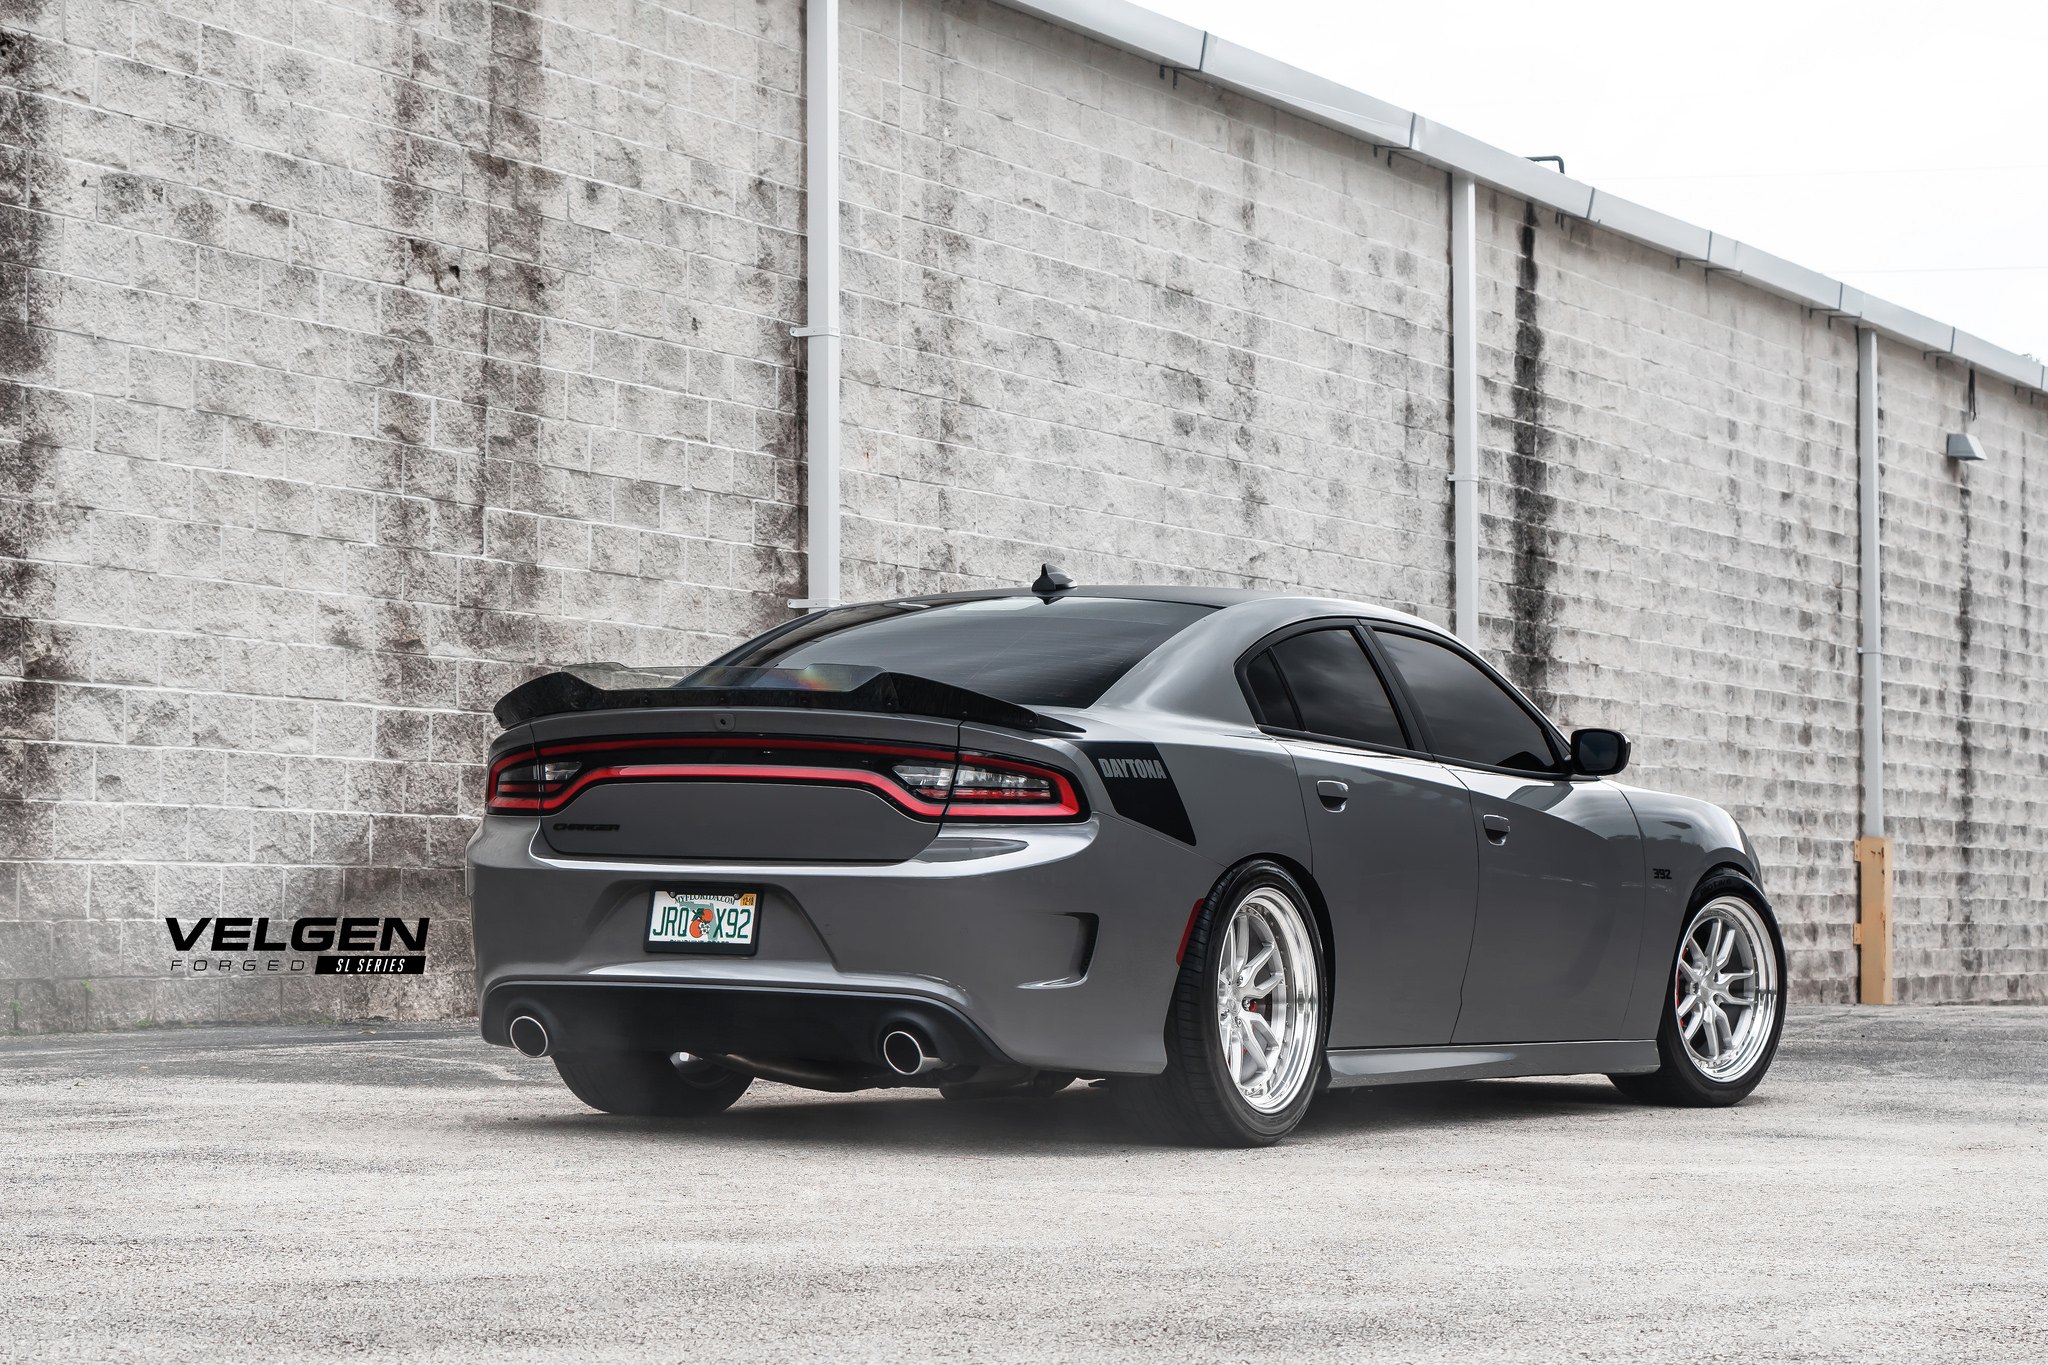 Aftermarket Rear Spoiler on Gray Dodge Charger - Photo by Velgen Wheels